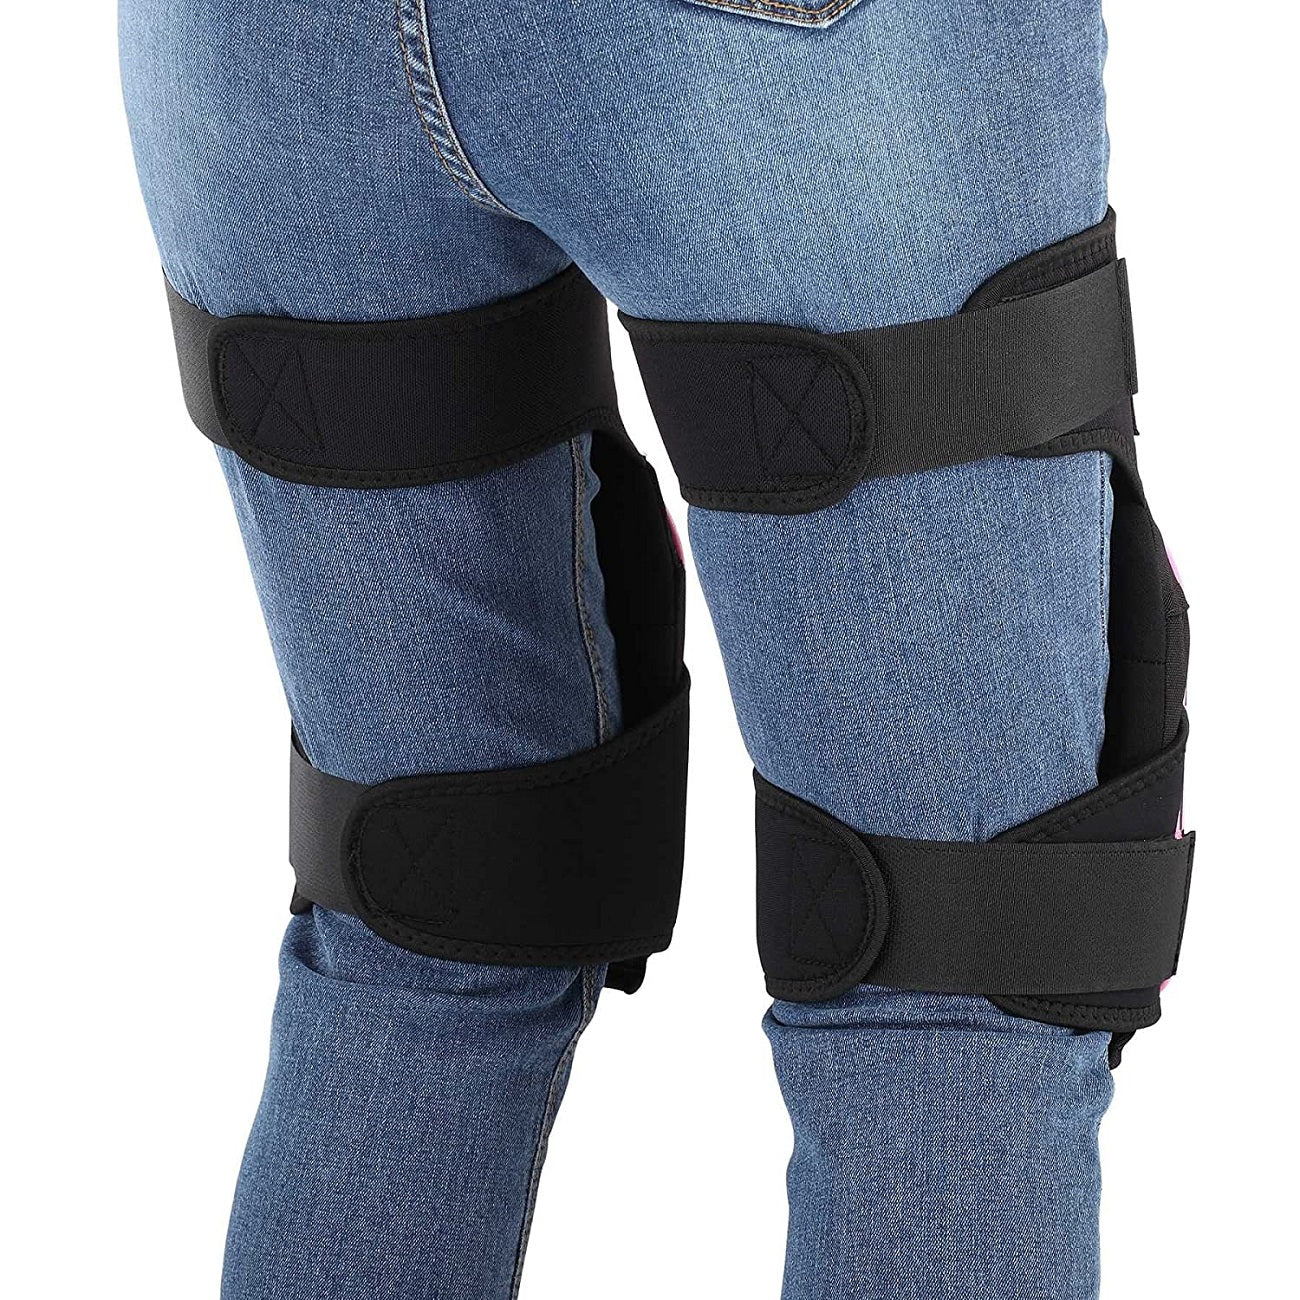 knee pads for work